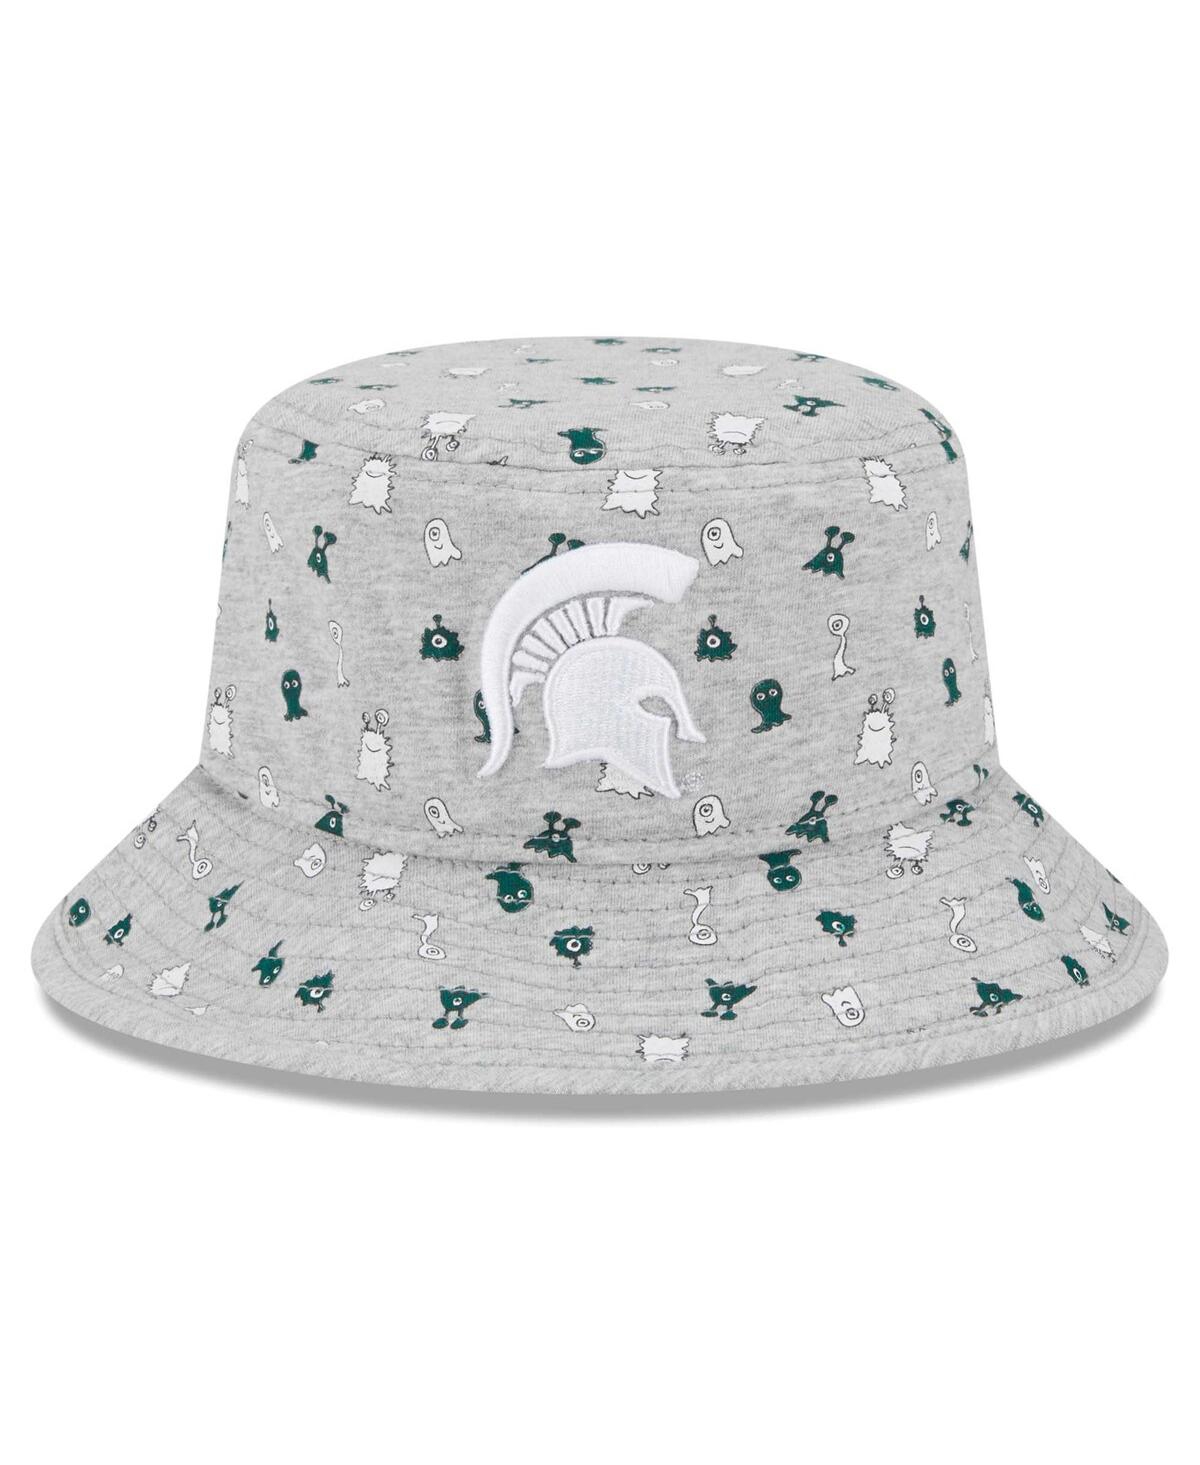 Shop New Era Toddler Boys And Girls  Heather Gray Michigan State Spartans Critter Bucket Hat